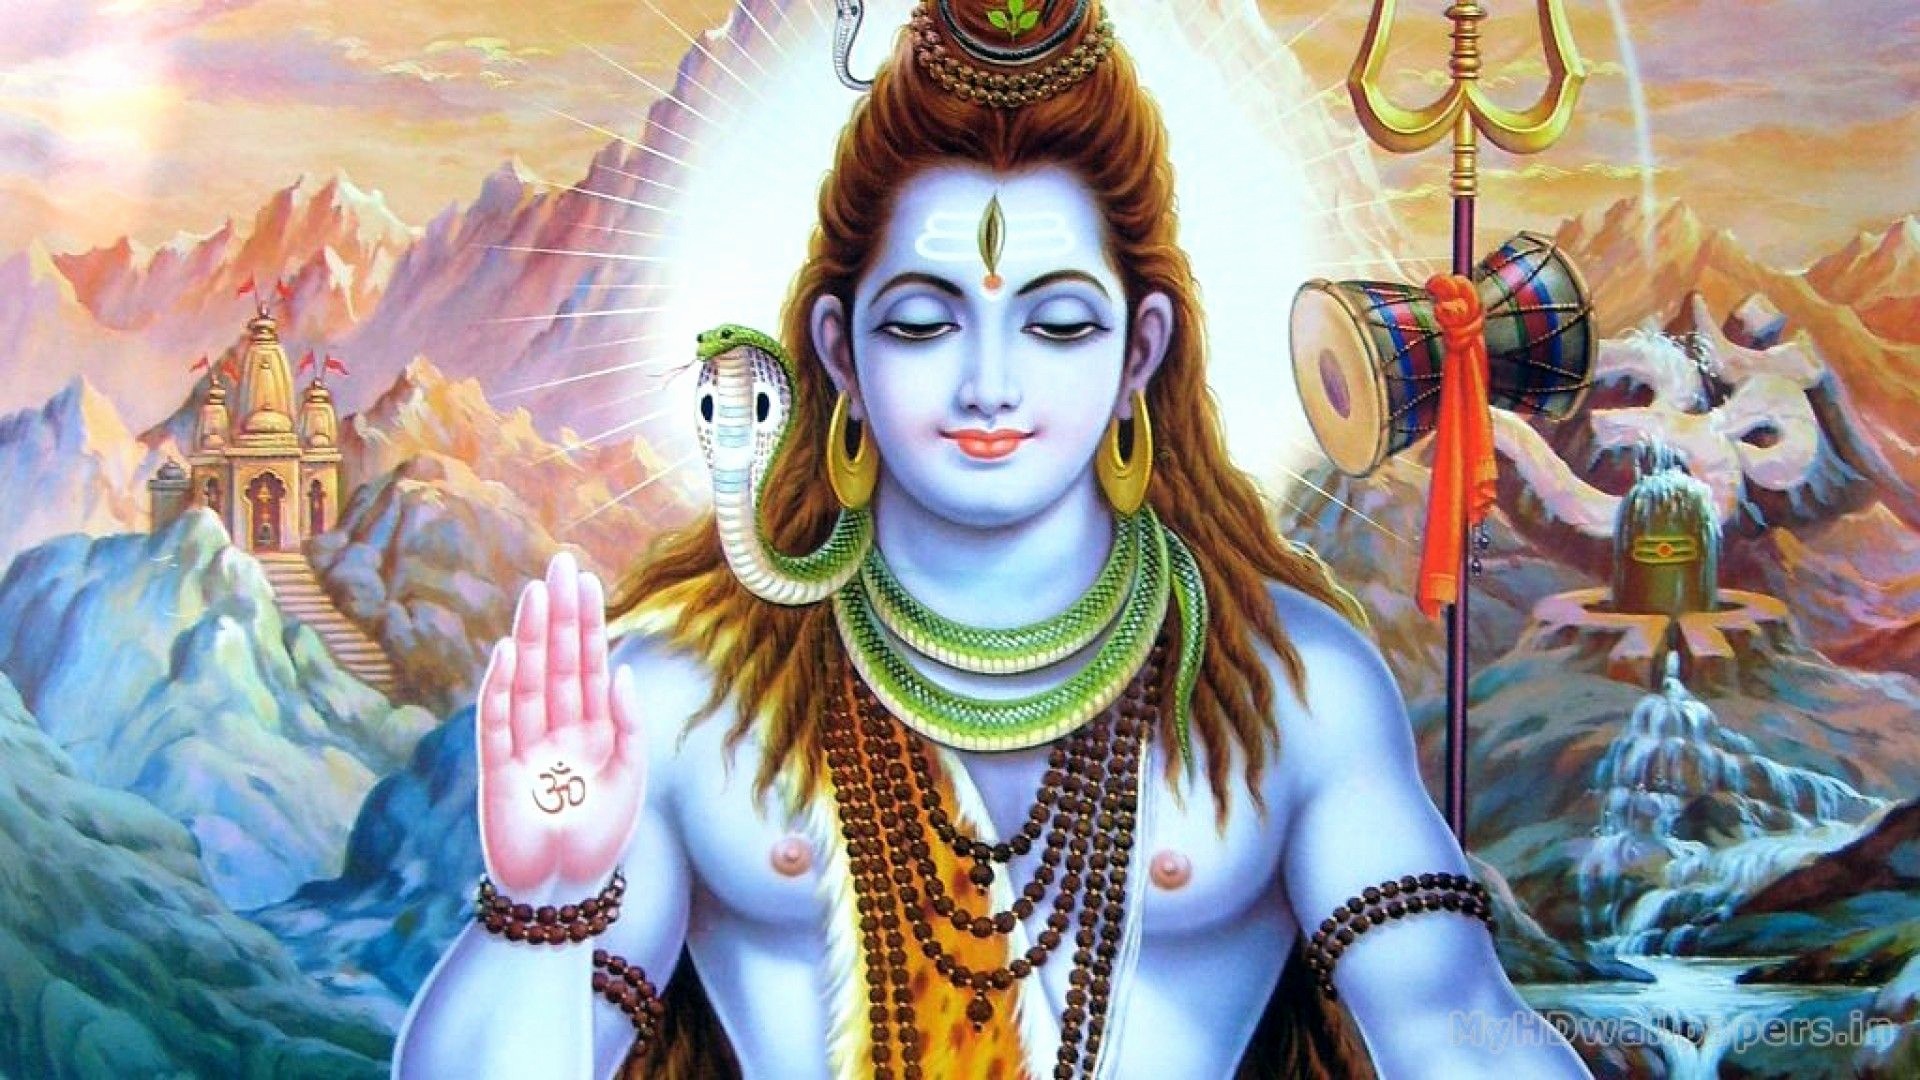 1920x1080 Shiva Animated Wallpaper Hd - Animated Wallpapers Awesome Amazing Lord  Shiva Wallpapers 1080p Hd Pics